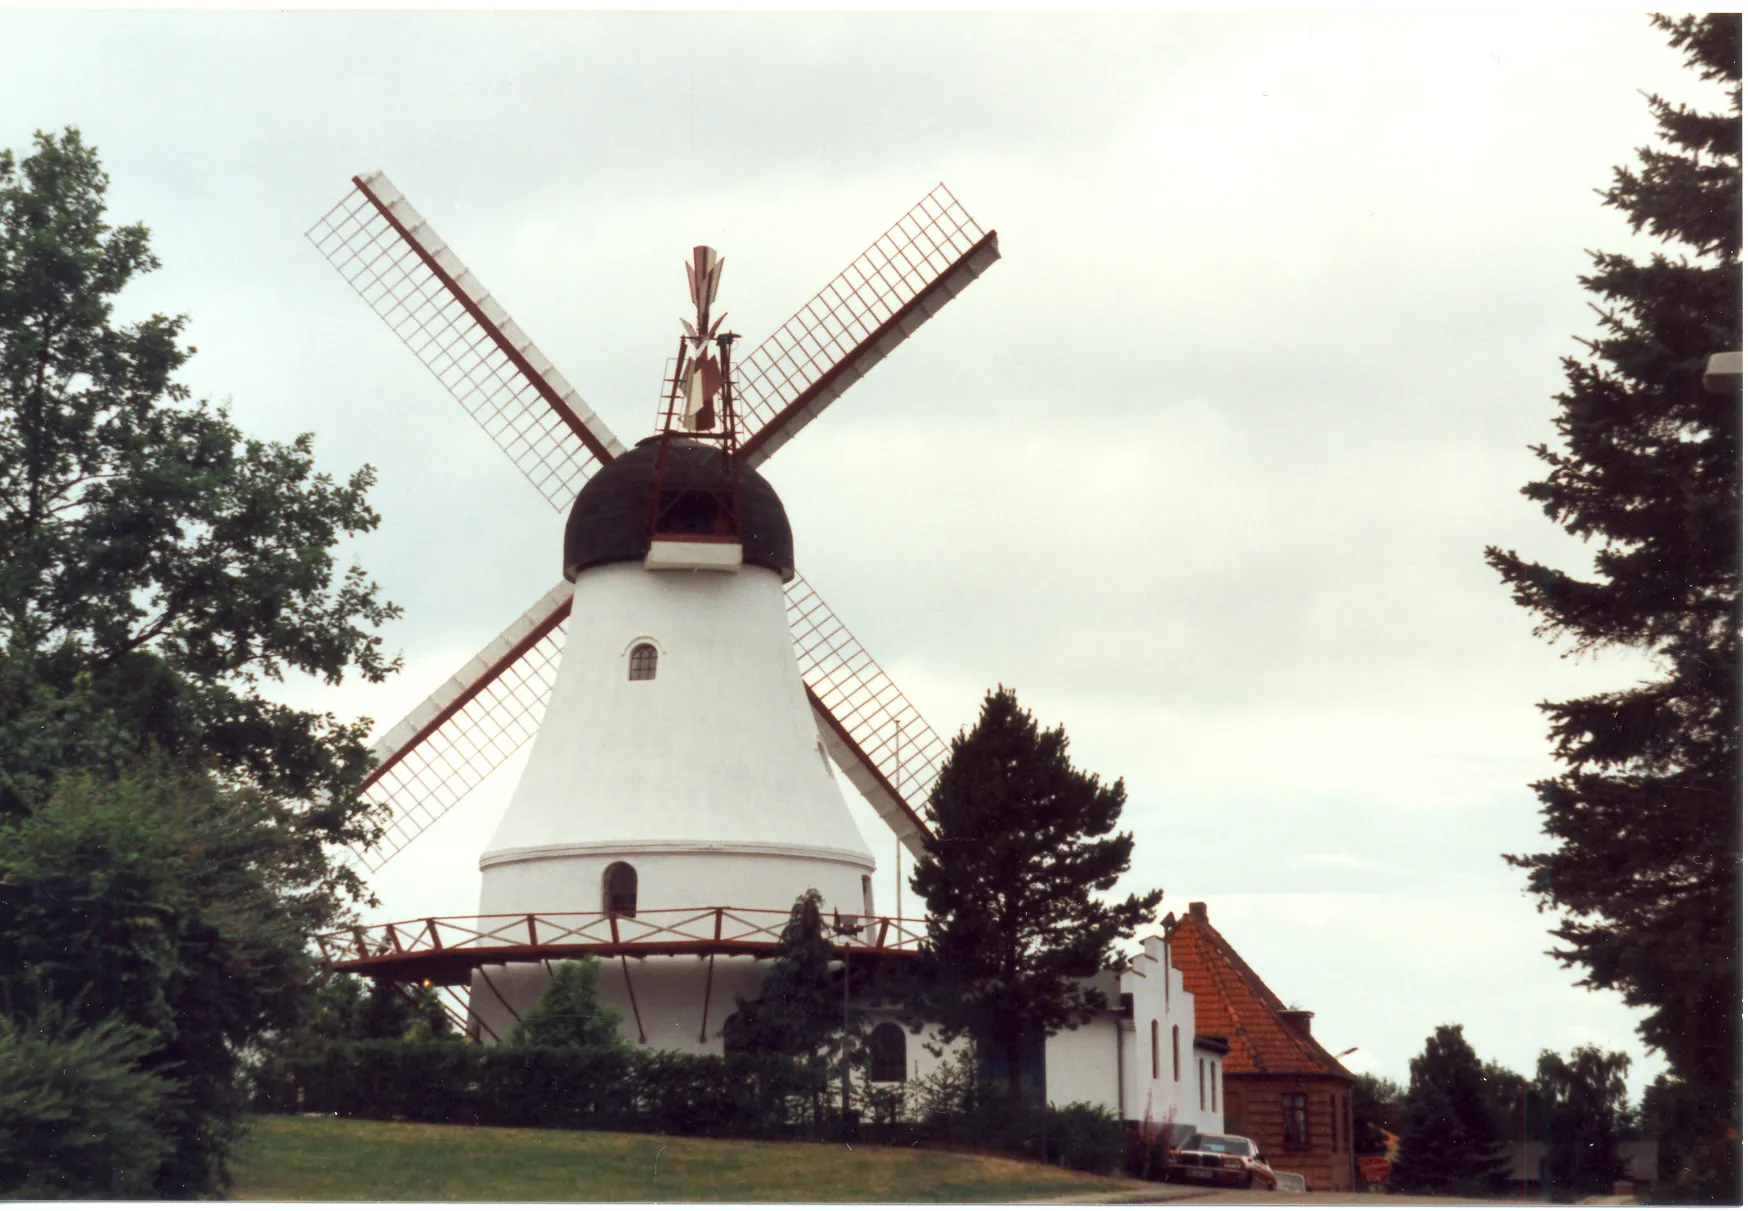 Photo showing: The Windmill in Vejle, Denmark, in July 1989